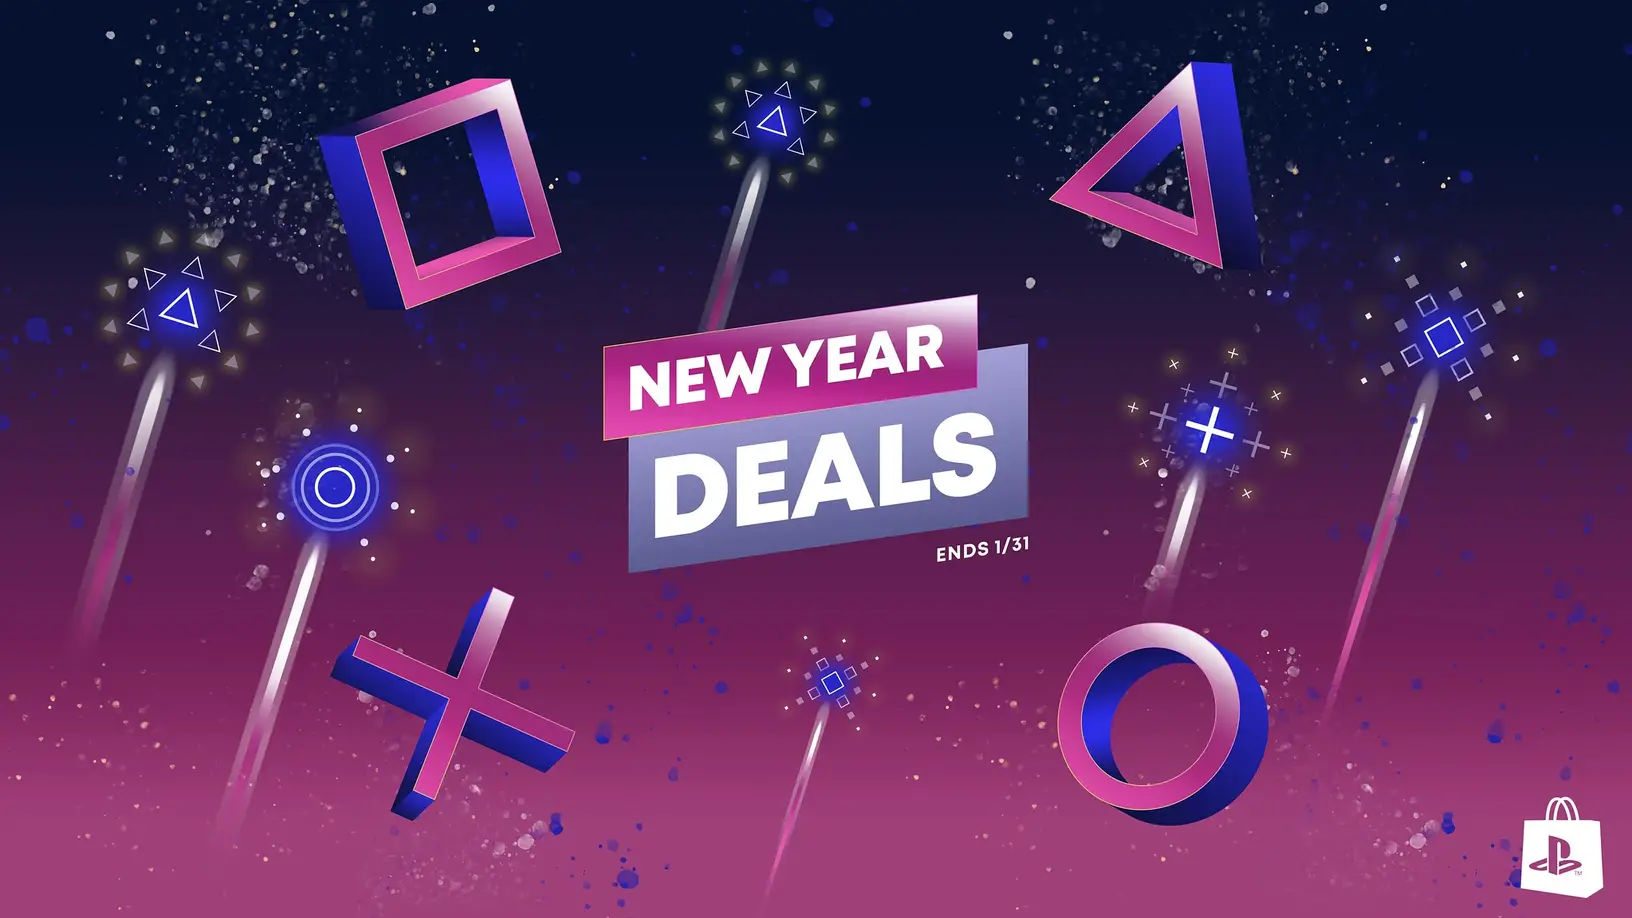 PlayStation Store "New Year Deals" Sale